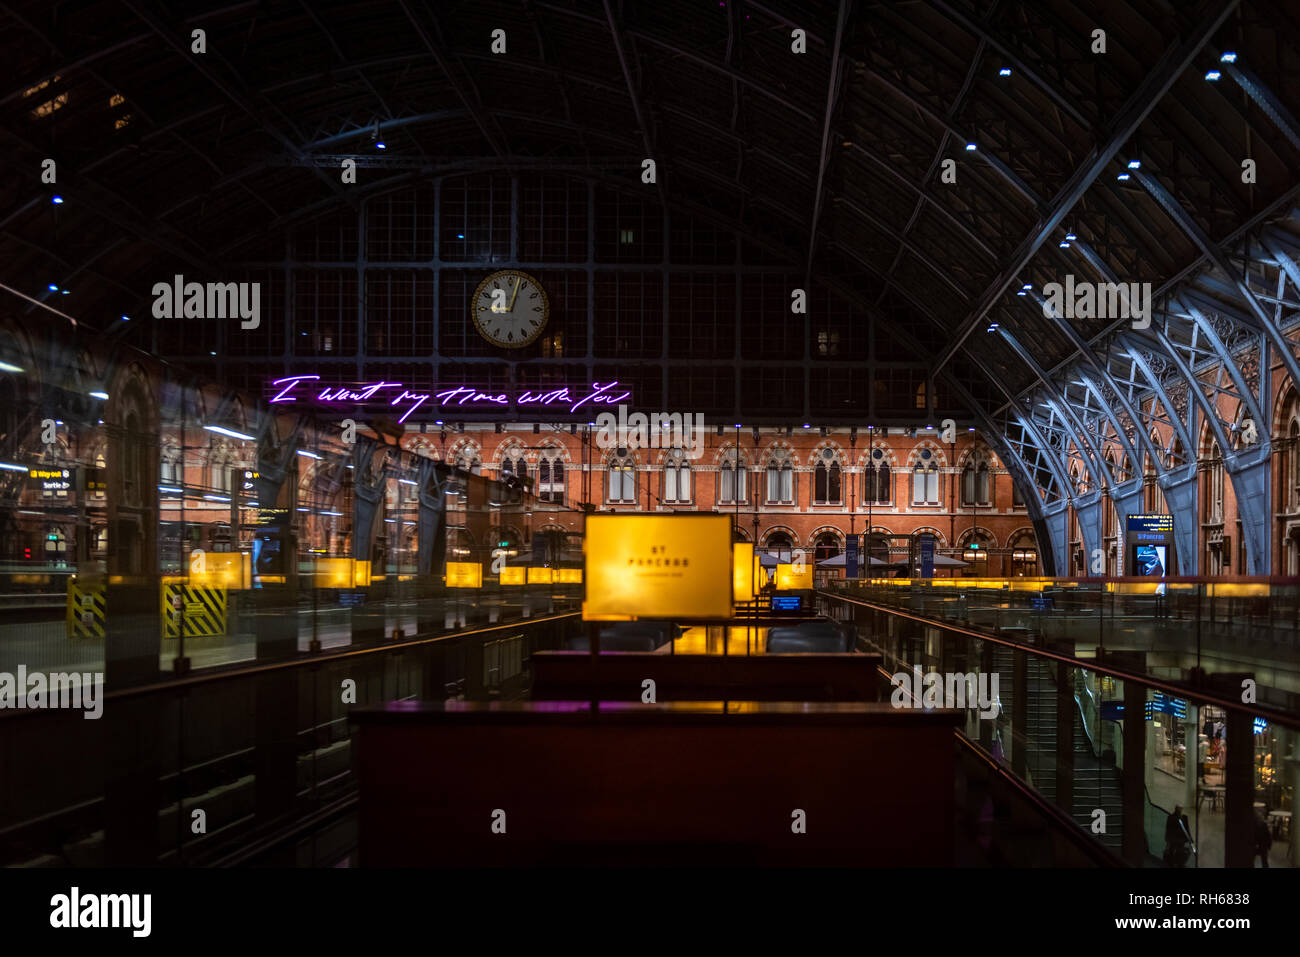 St. Pancreas International train station and the neon sign reading 'I want my time with you' with no people in the image Stock Photo